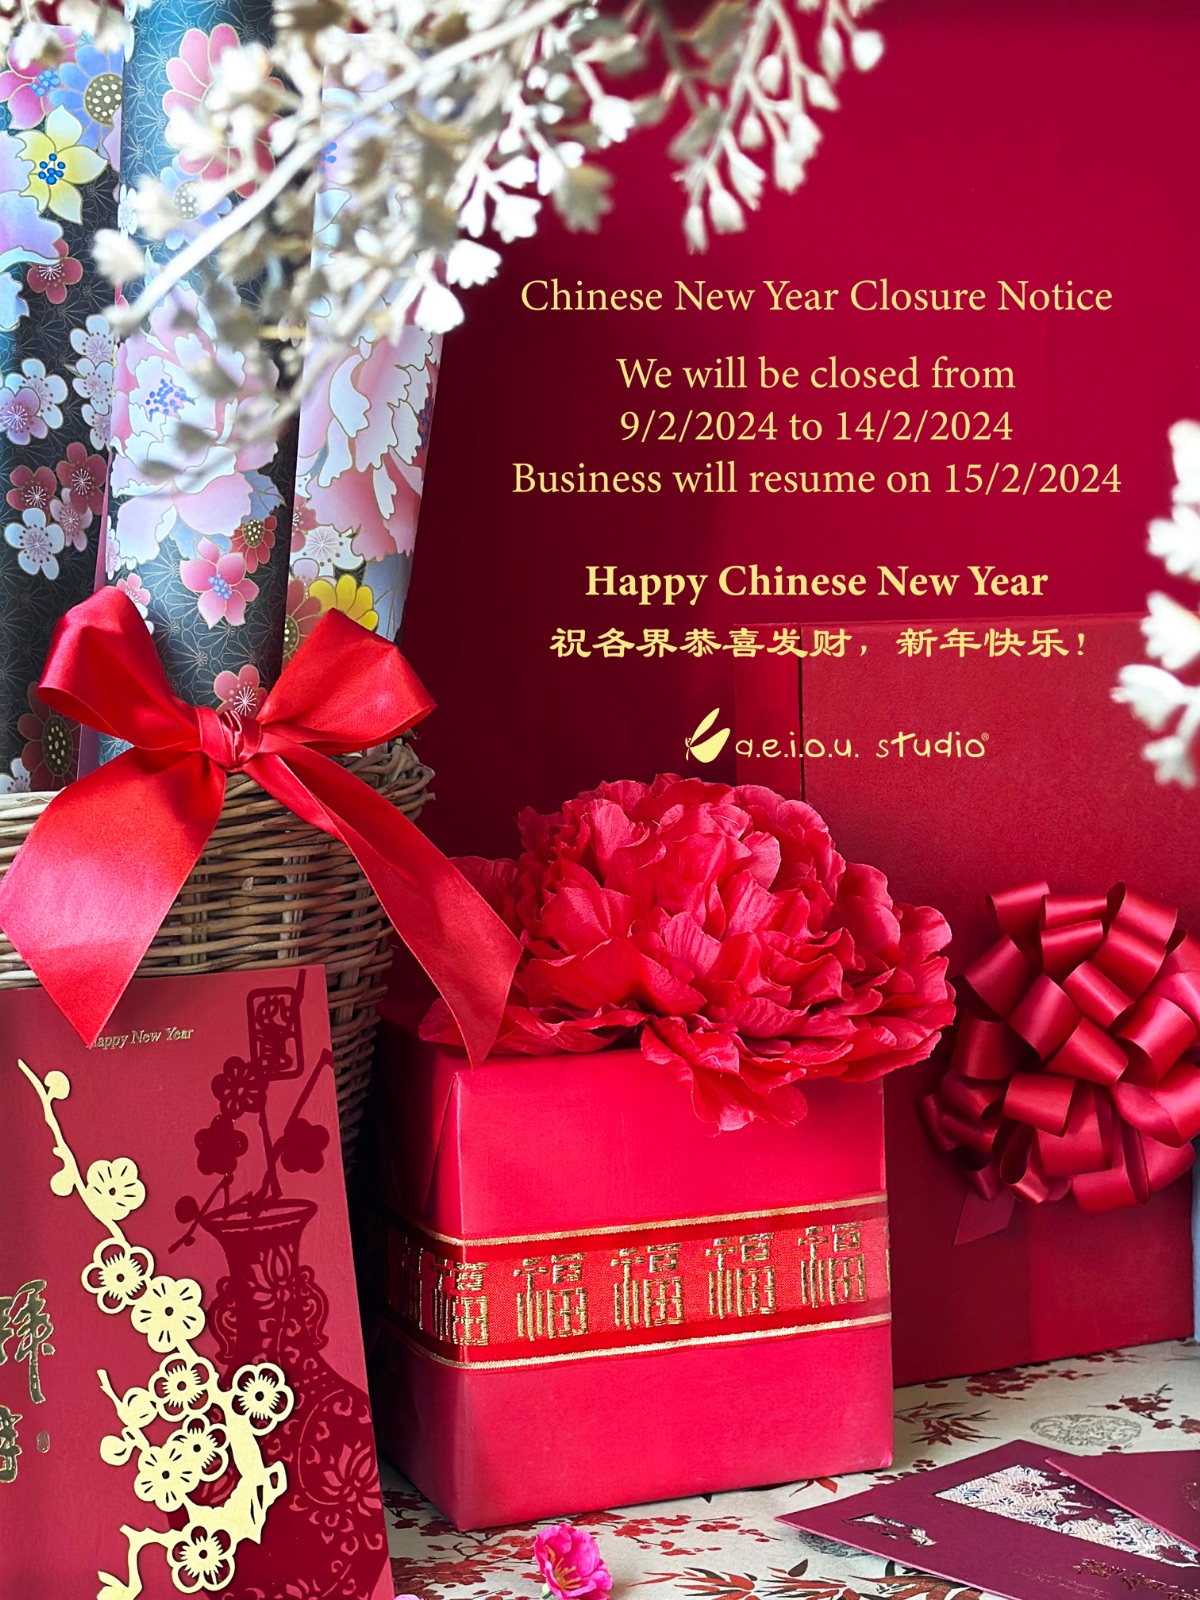 Chinese New Year Notice 